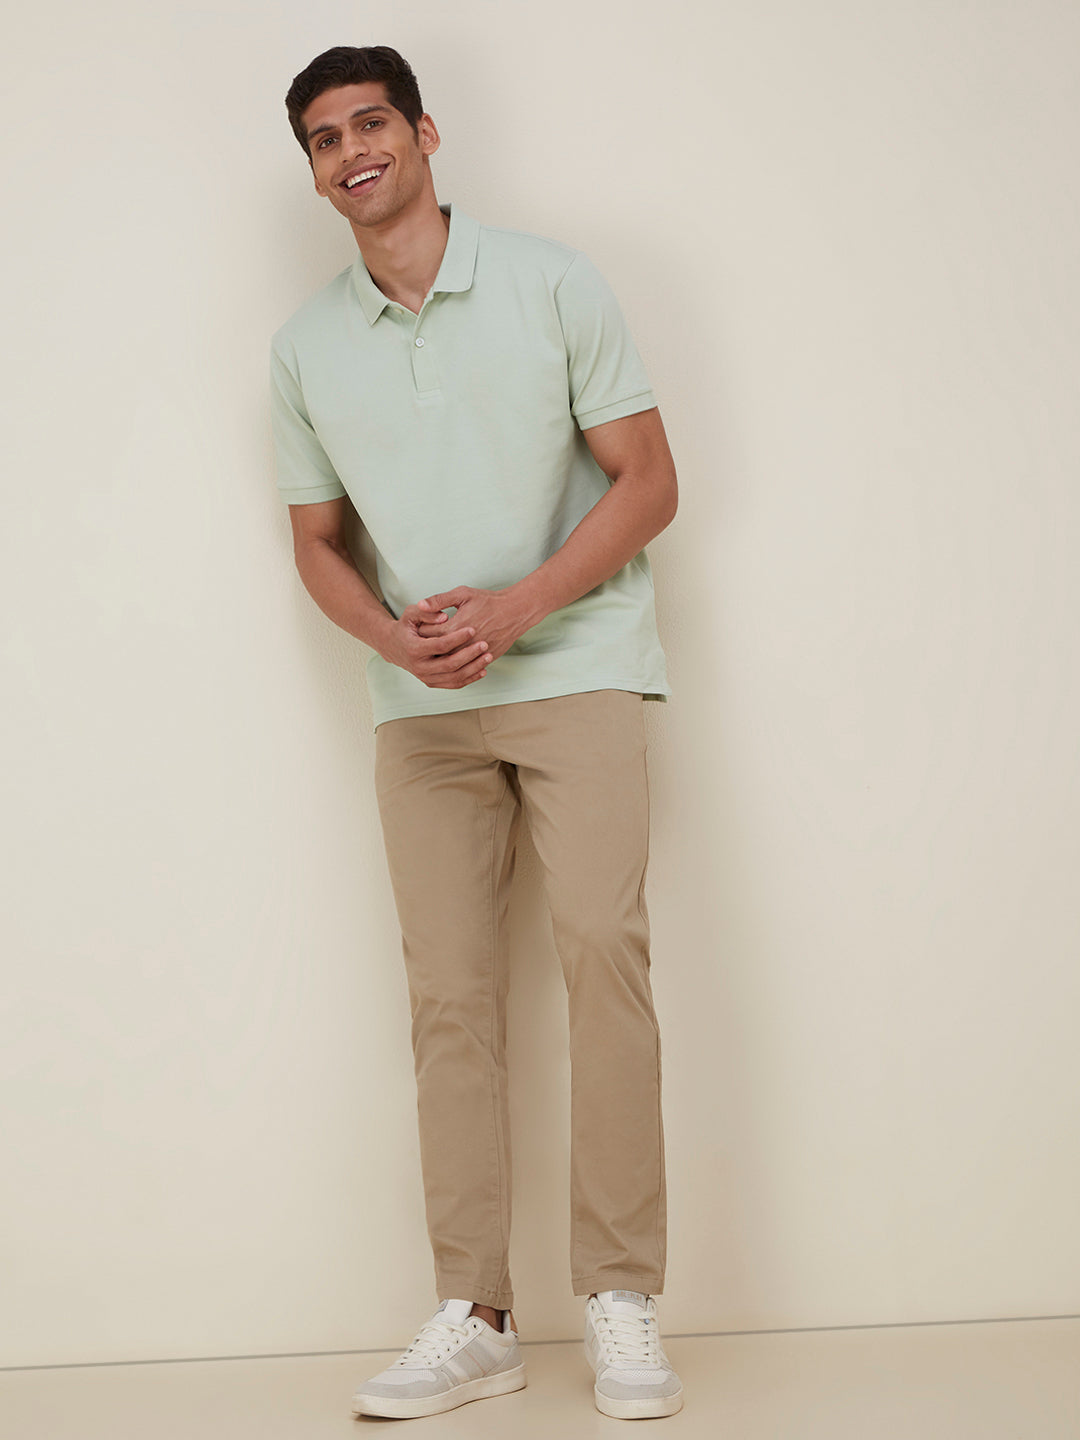 WES Casuals Sage Slim-Fit Polo T-Shirt | Sage Slim-Fit Polo T-Shirt for Men Full View - Westside